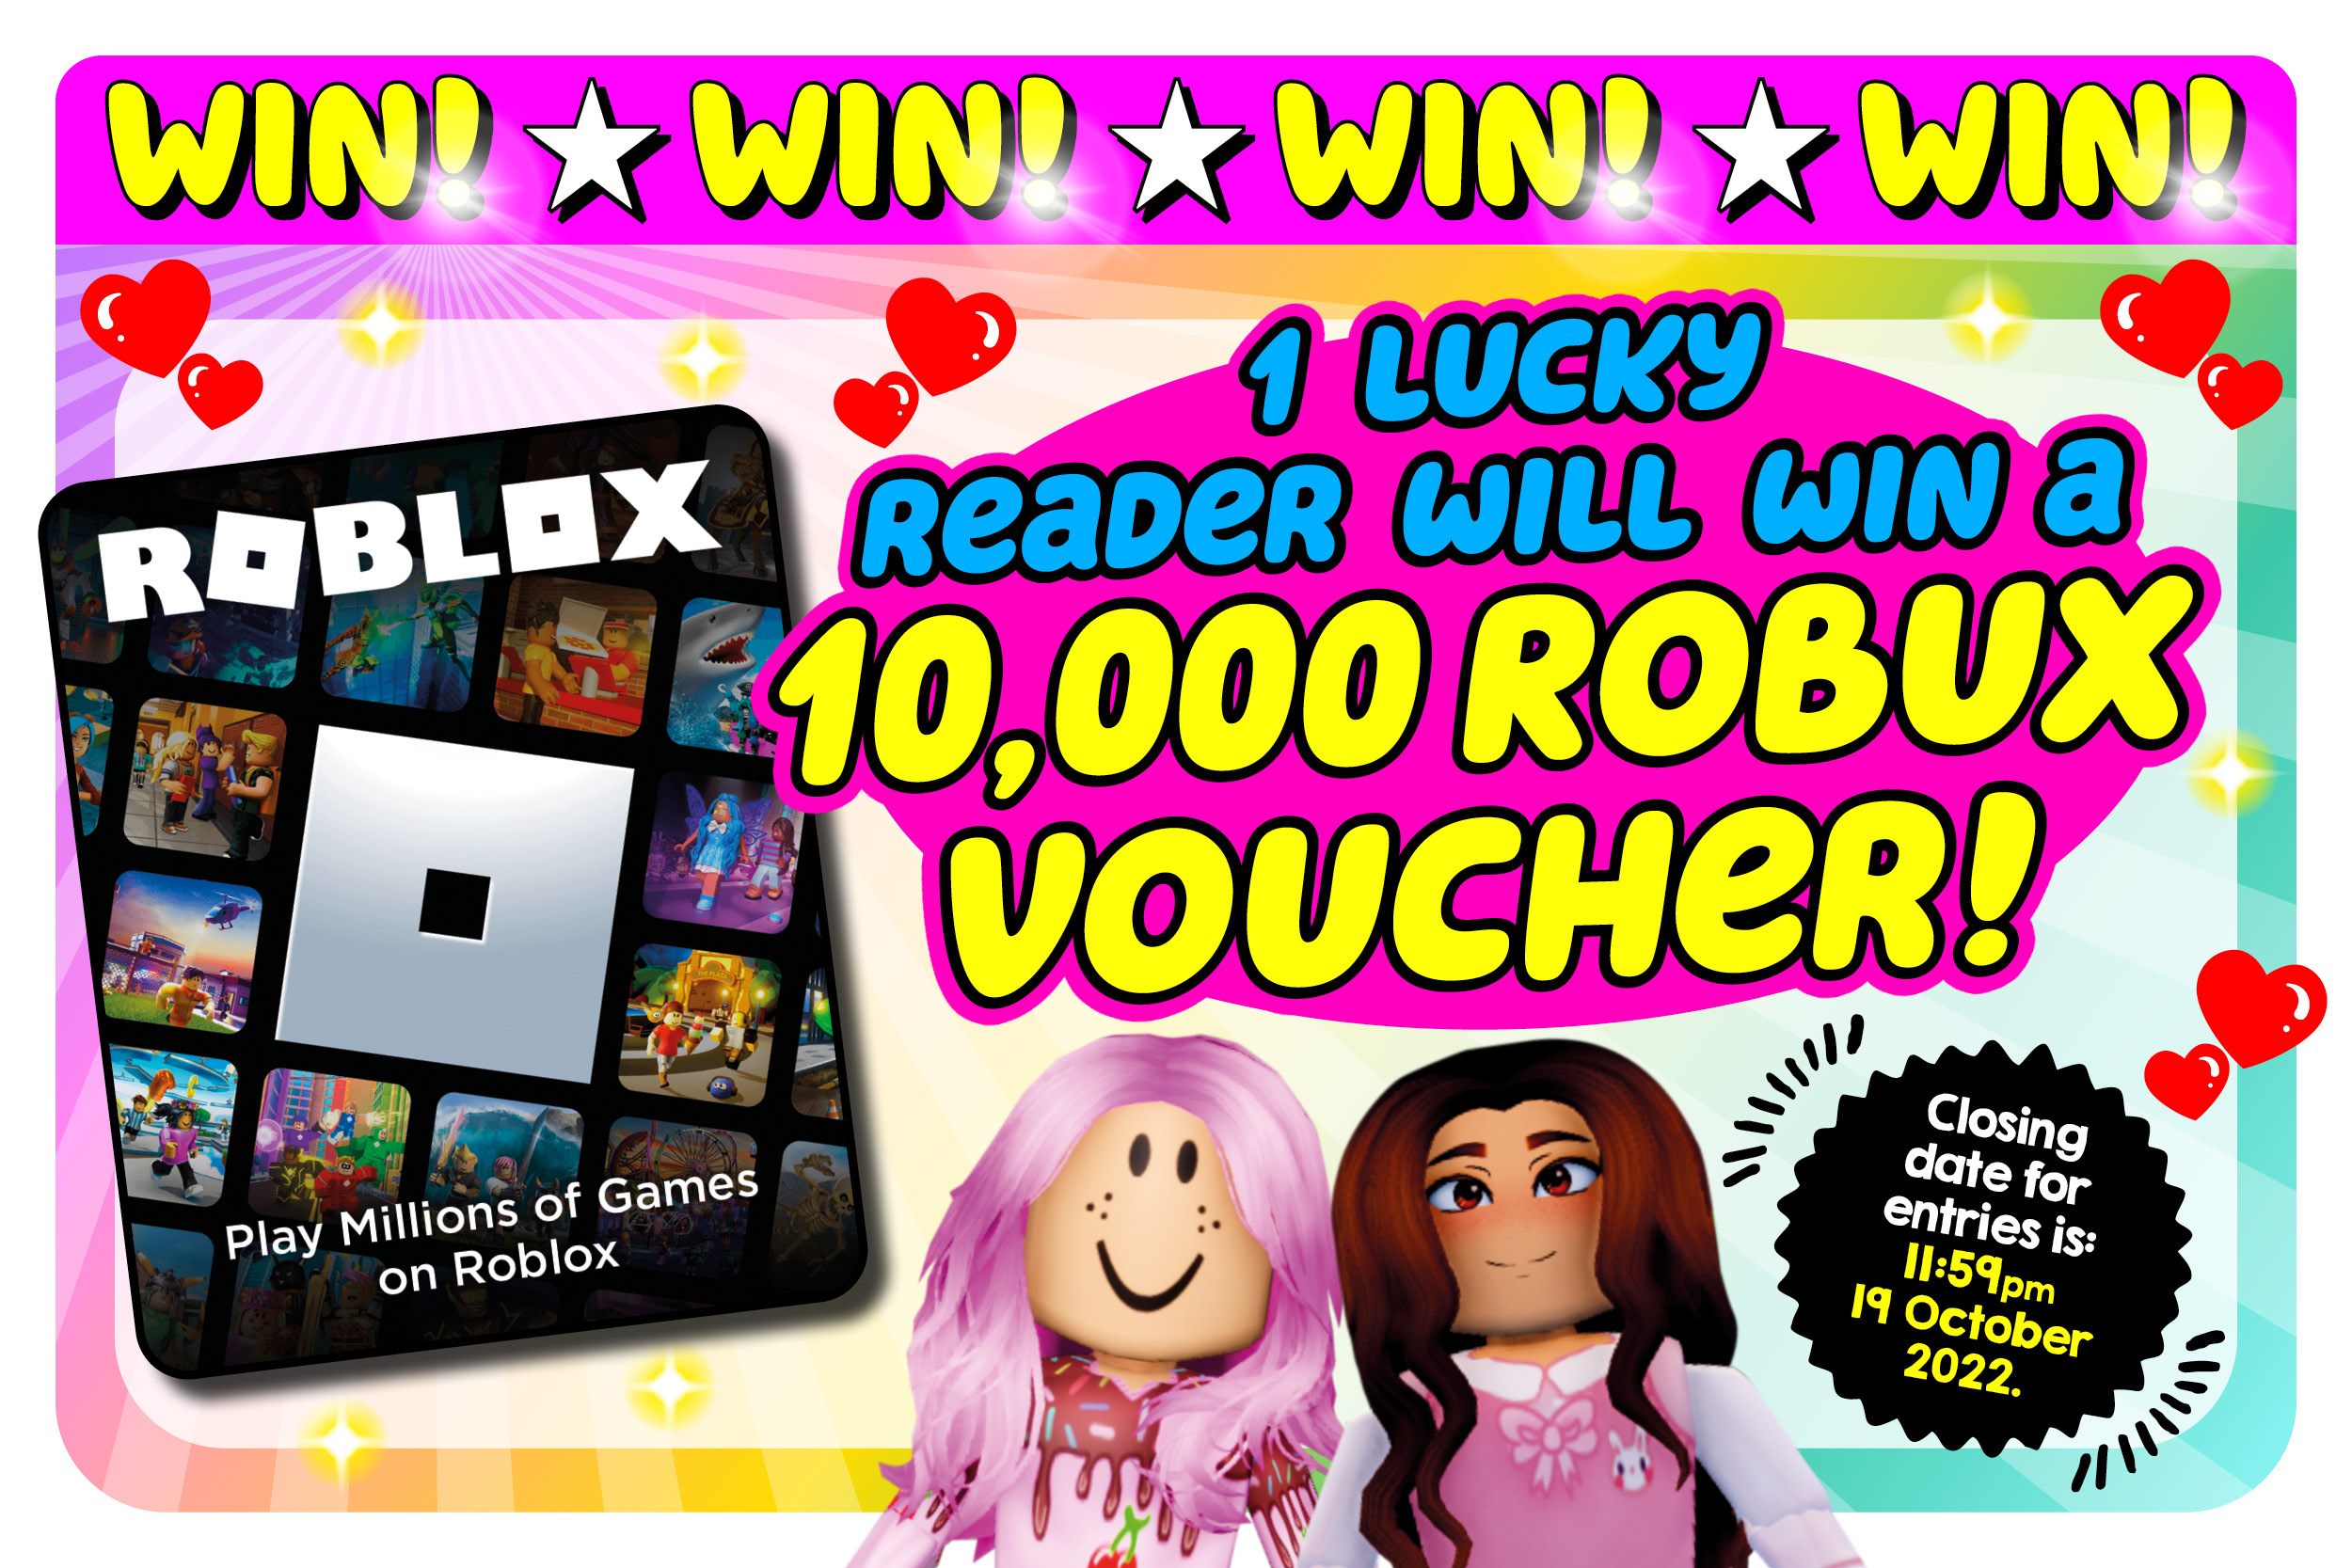 ISSUE 327: WIN! 10,000 ROBUX VOUCHER!